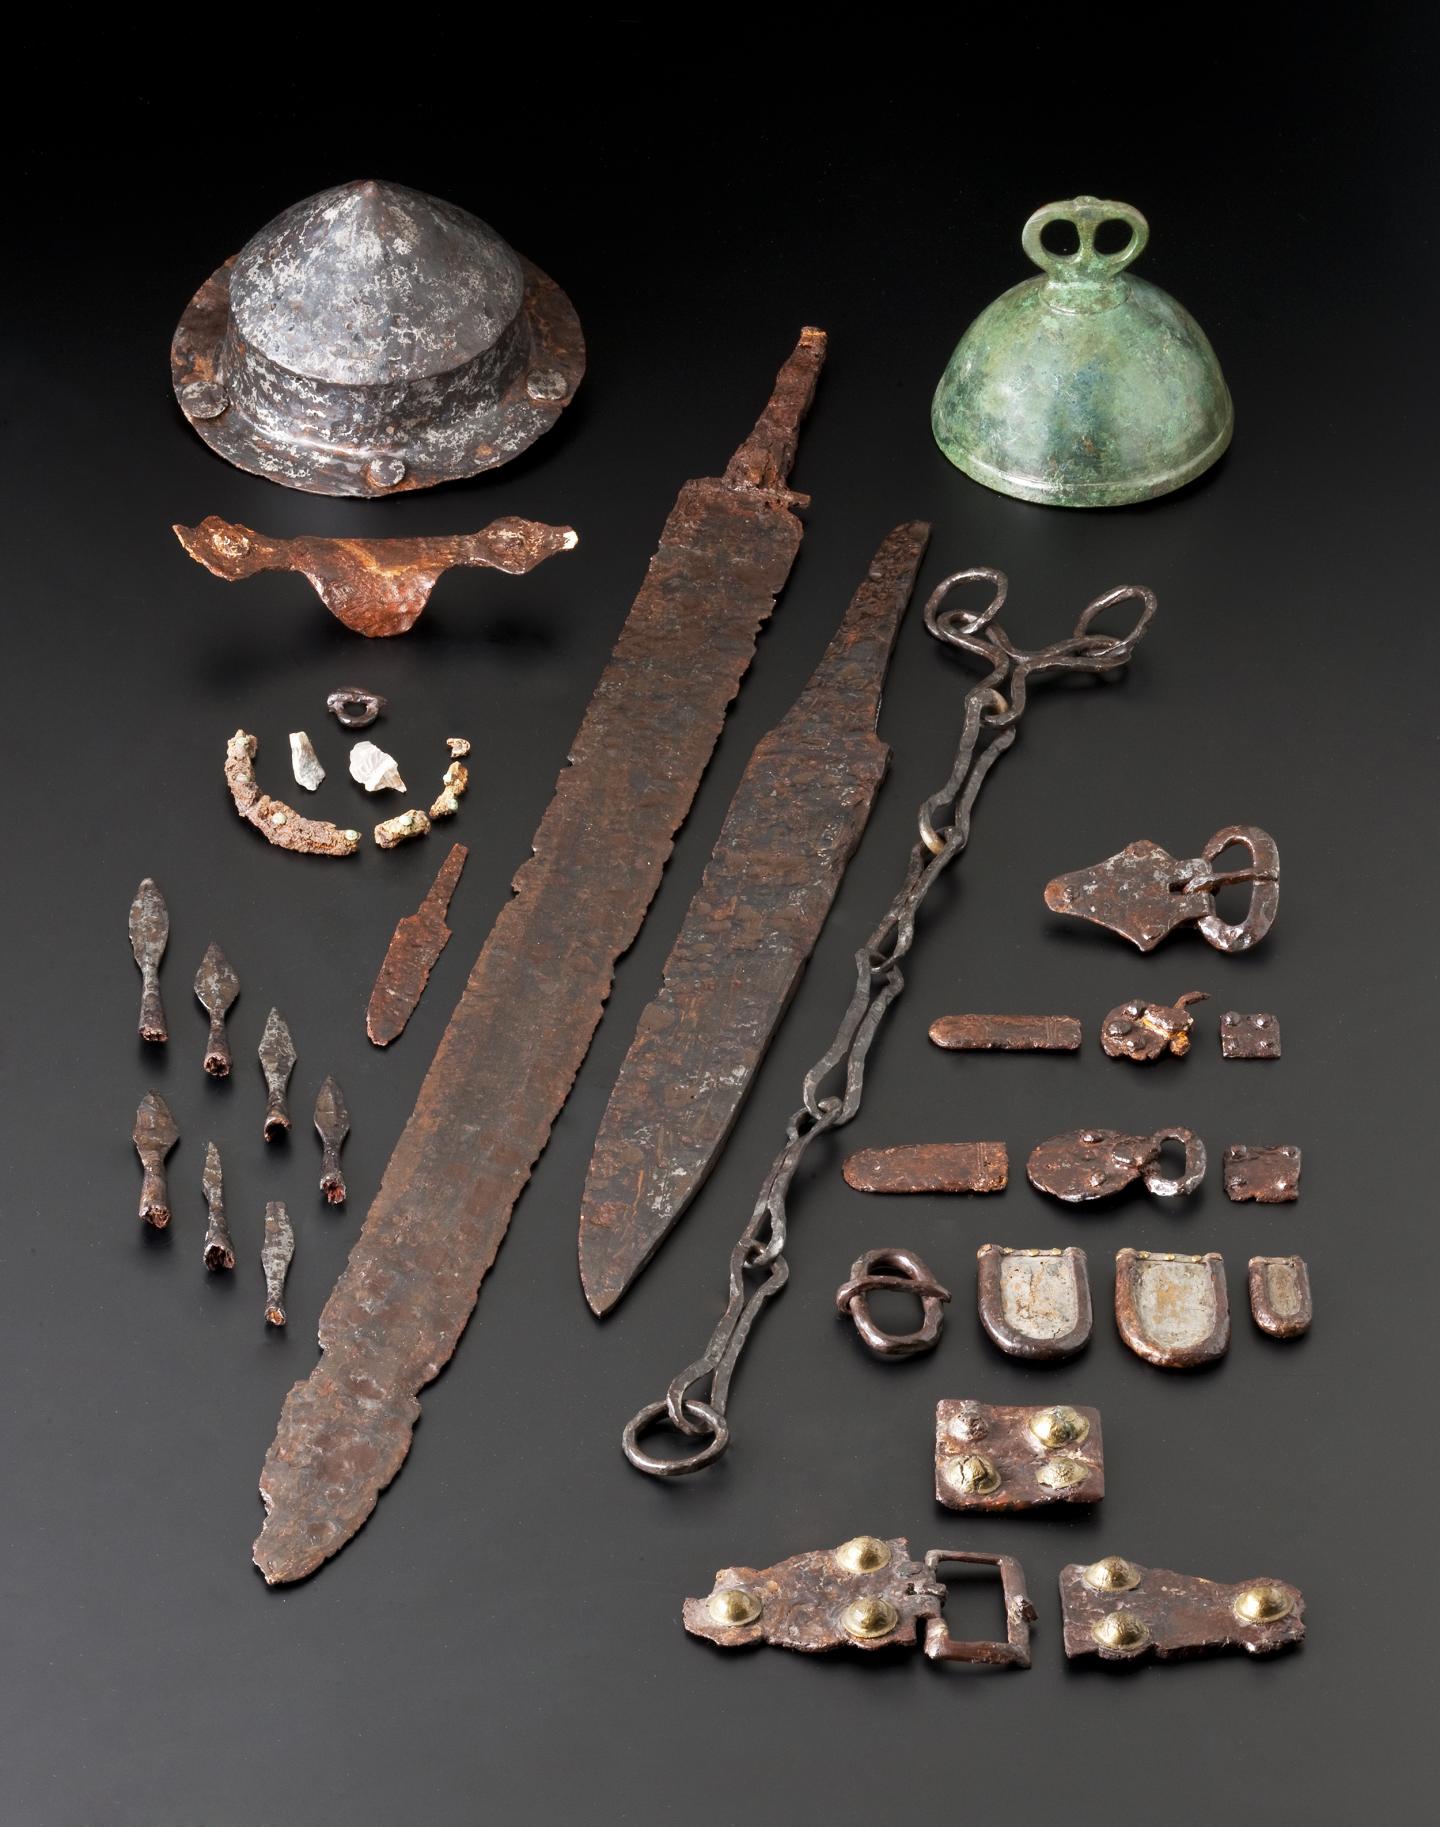 Revealed: Genetic Secrets of High-Ranked Warriors at a Medieval German Burial Site (4 of 8)